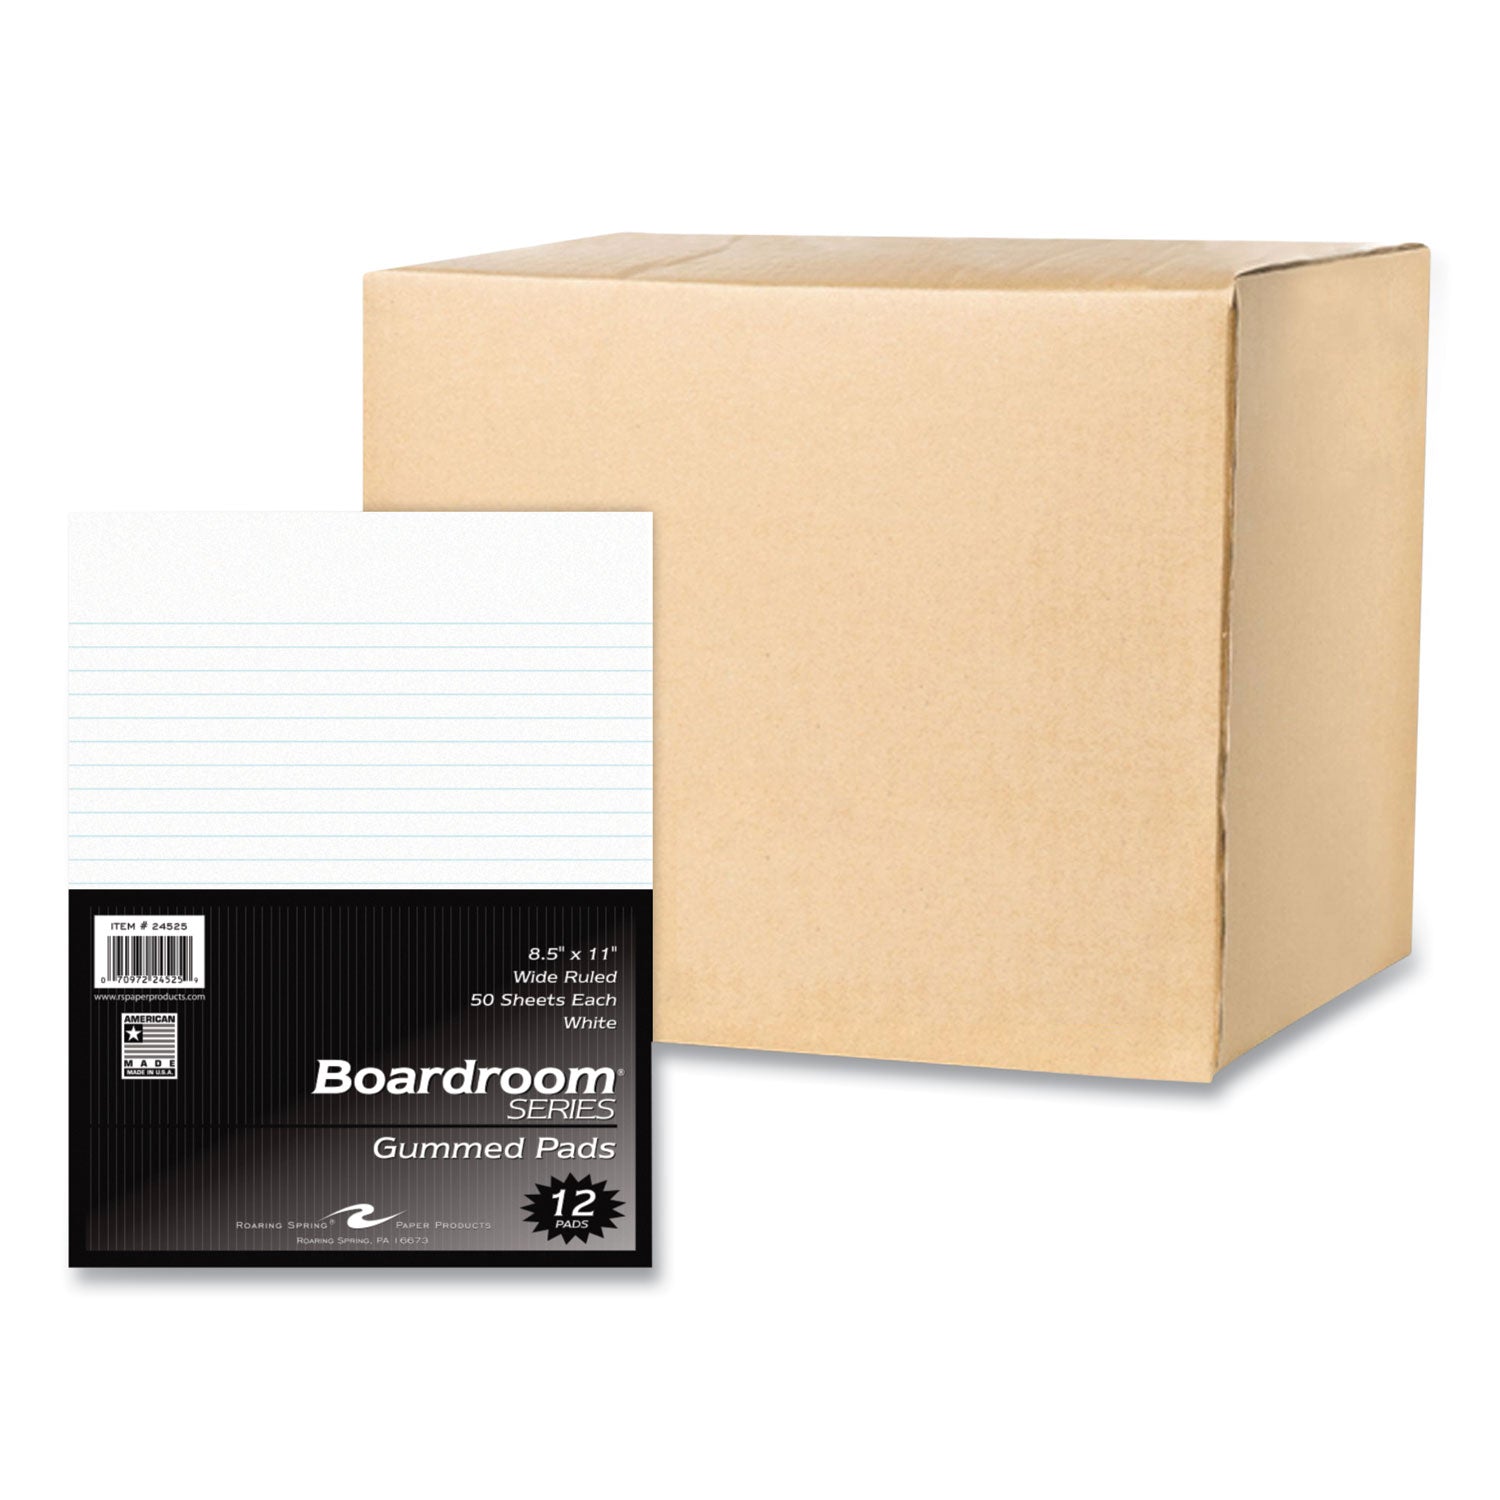 boardroom-gummed-pad-wide-rule-50-white-85-x-11-sheets-72-carton-ships-in-4-6-business-days_roa24525cs - 1